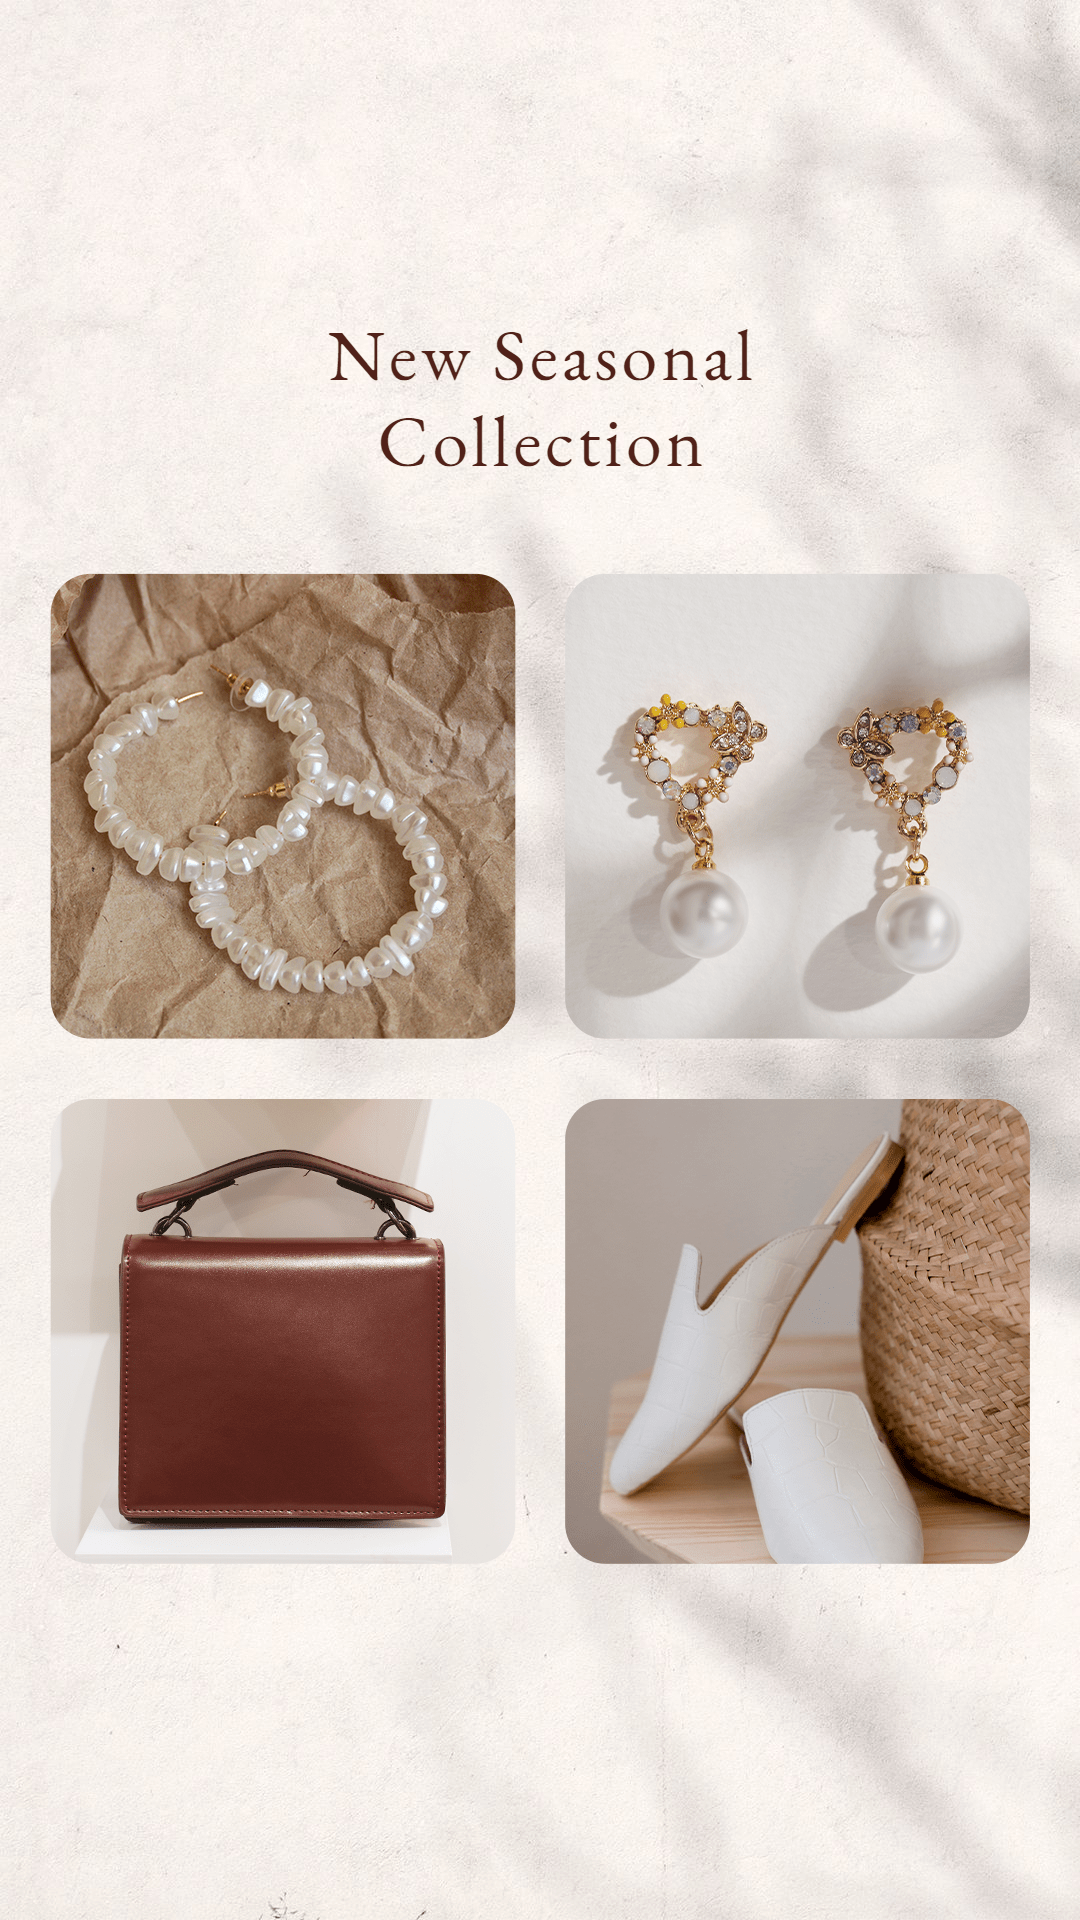 Bag and Shoes and Jewelry and Accessories New Product Arrival Ecommerce Story预览效果